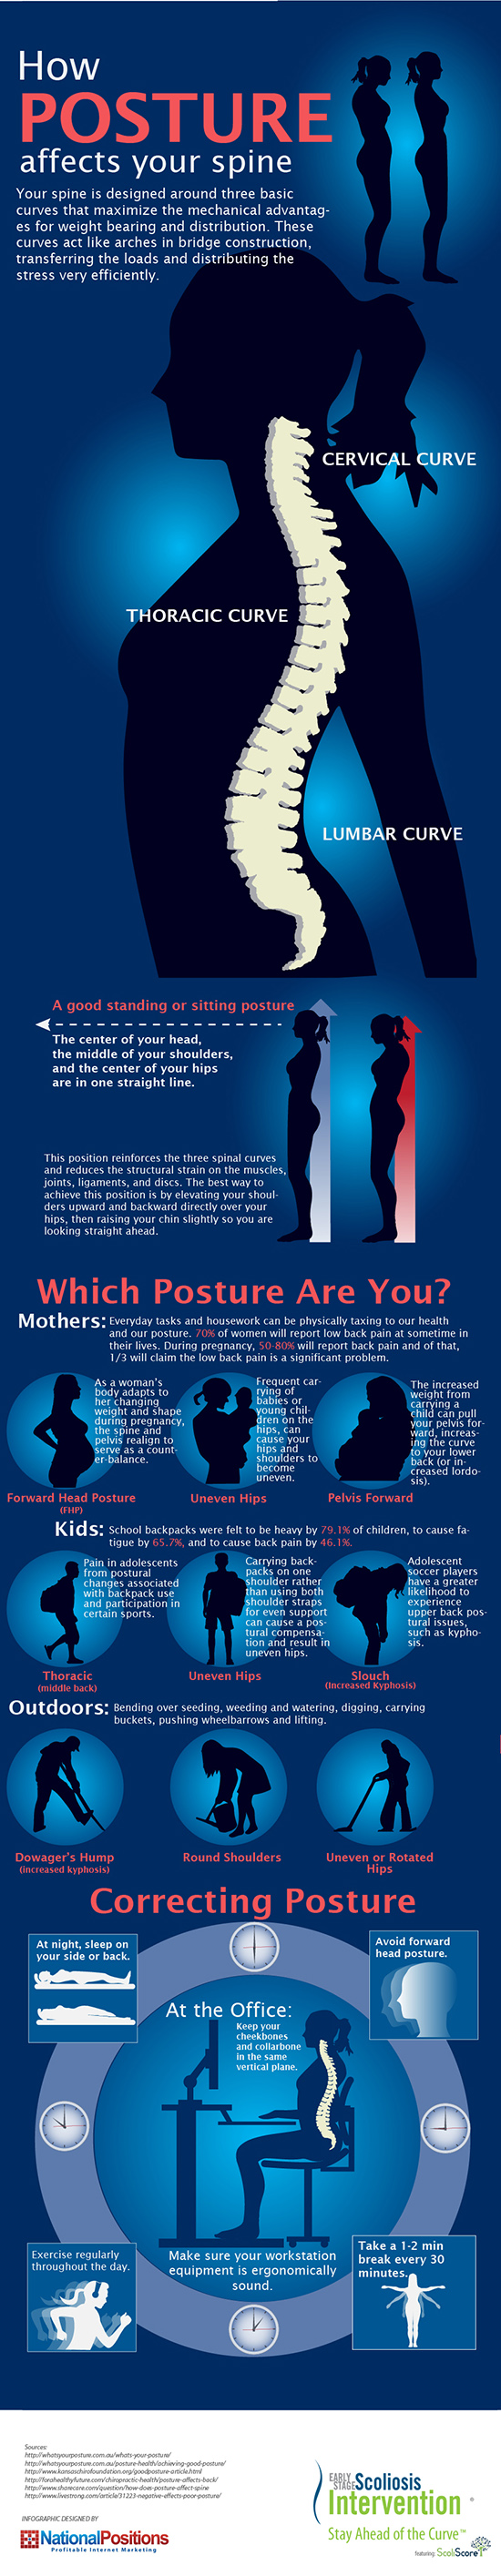 The-Effects-of-Posture-on-the-Spine